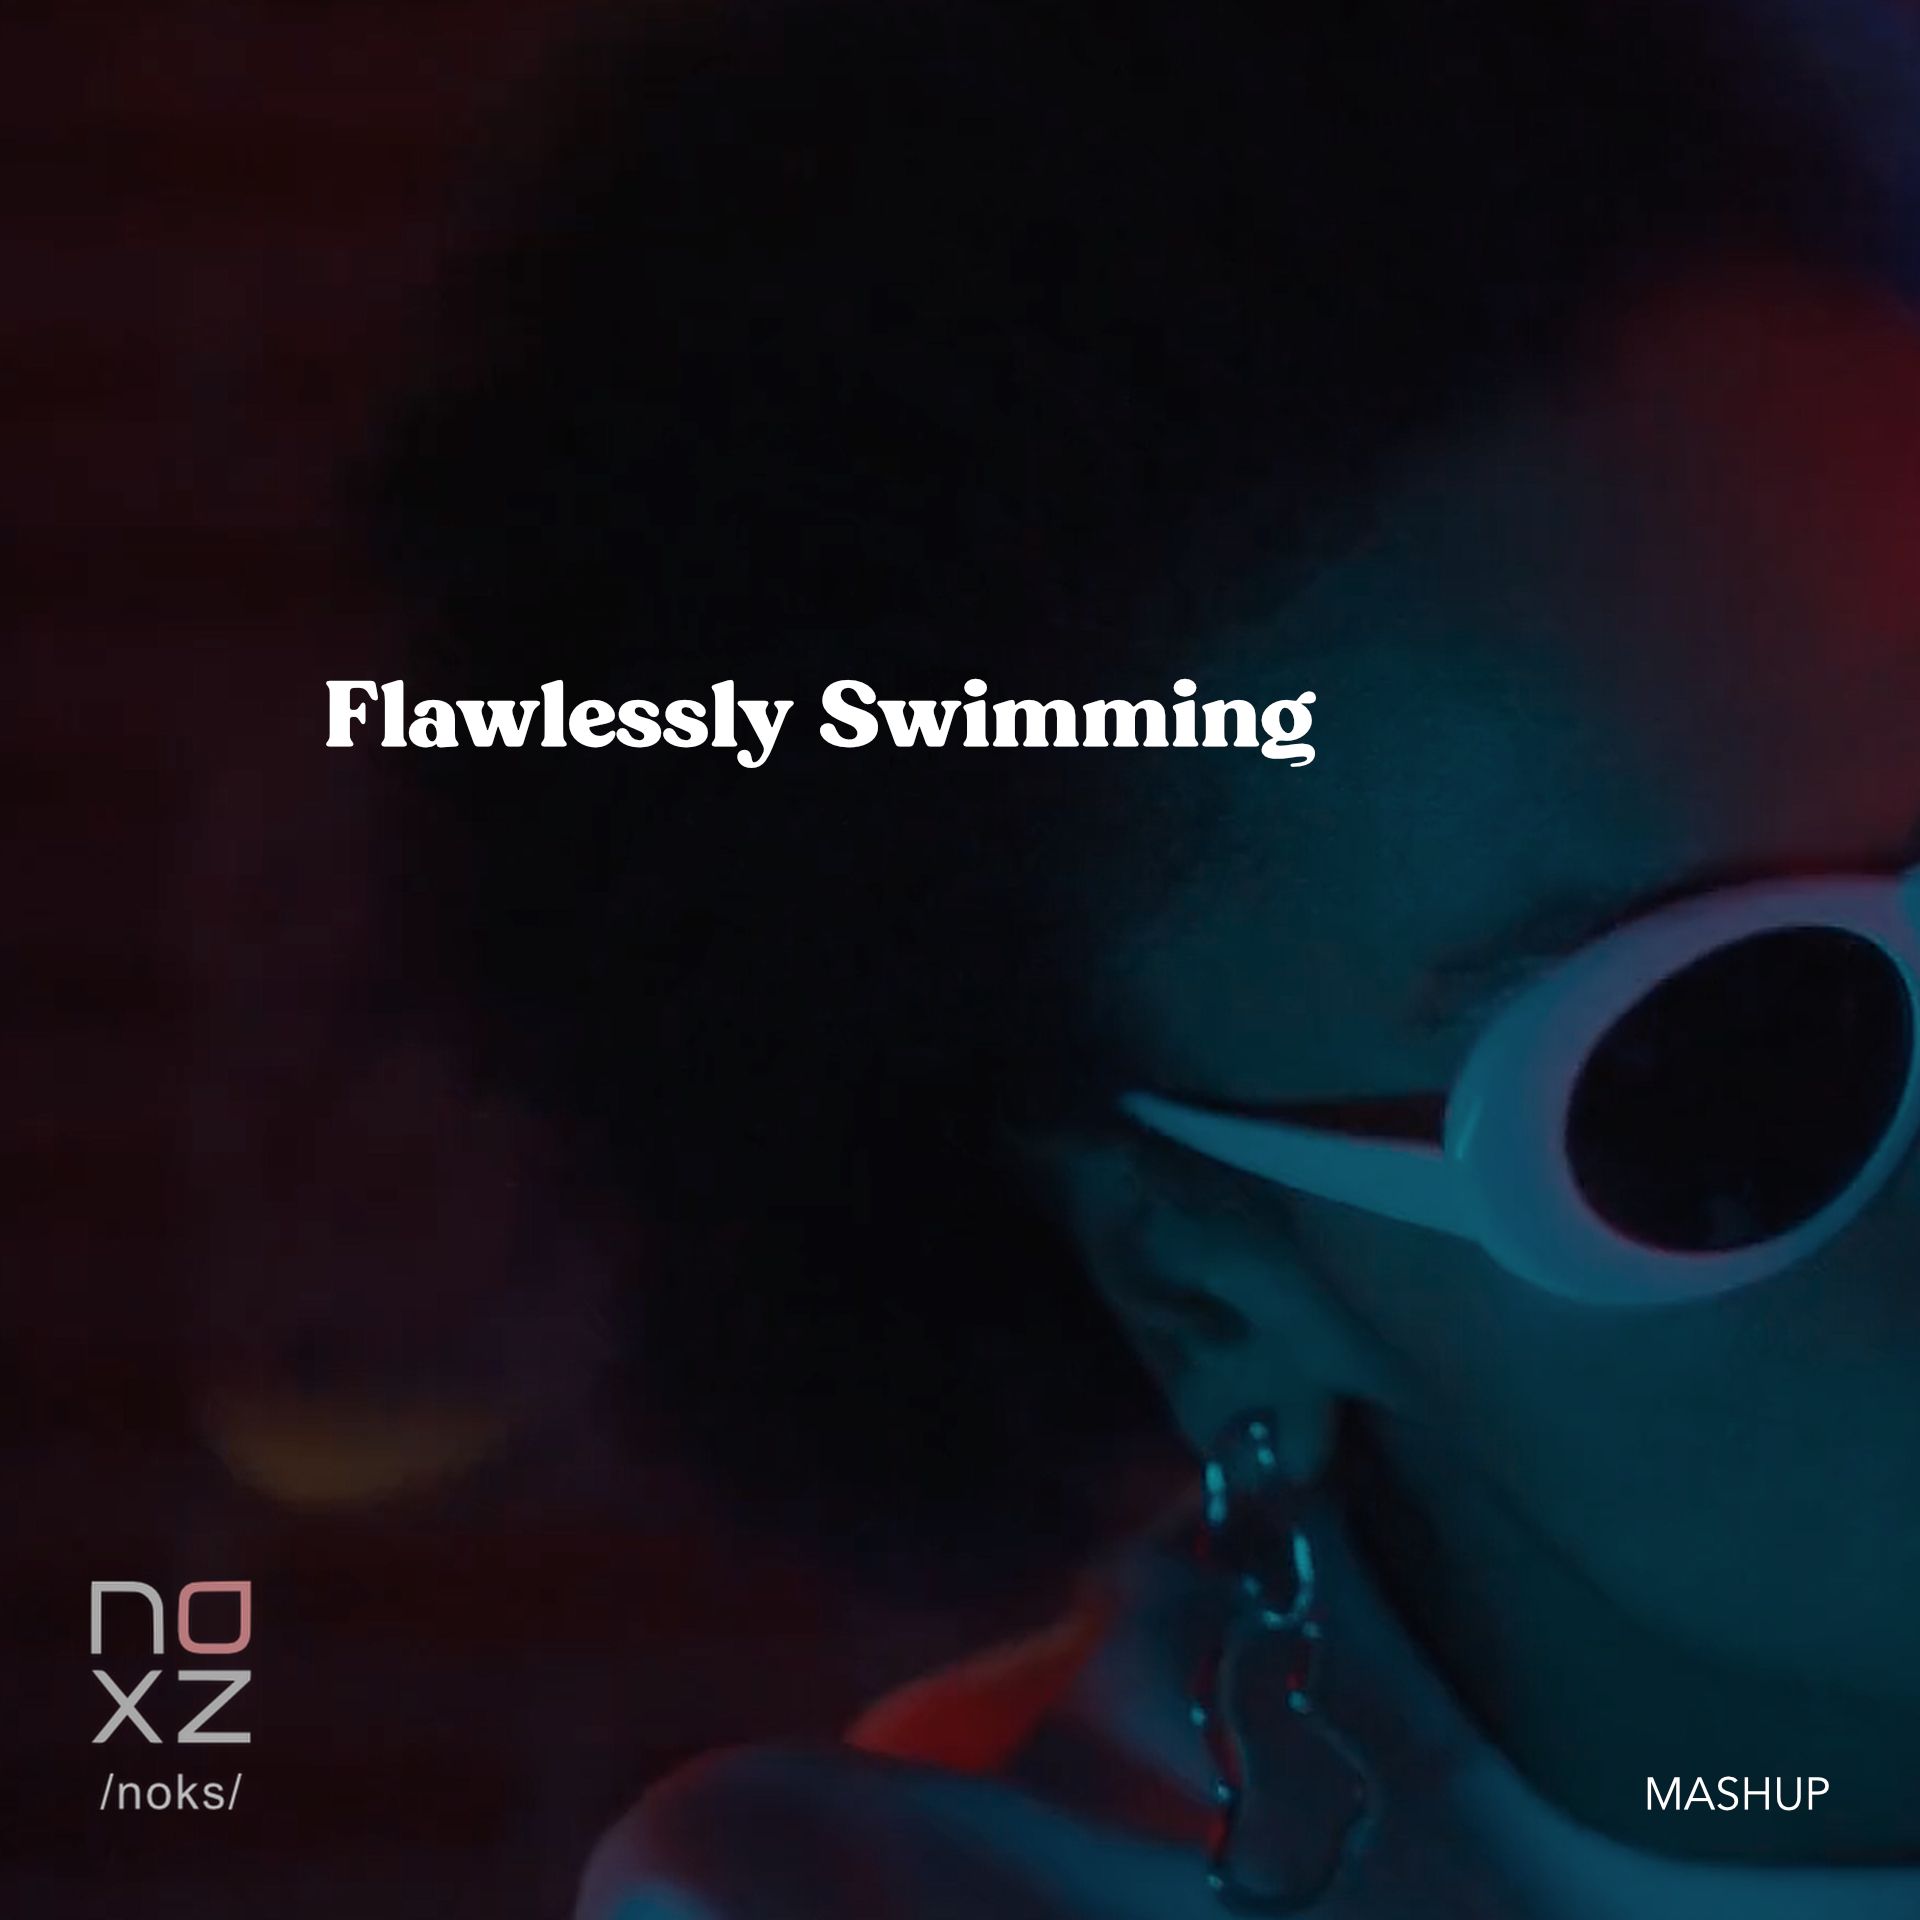 Descarca Flawlessly Swimming [MASHUP]